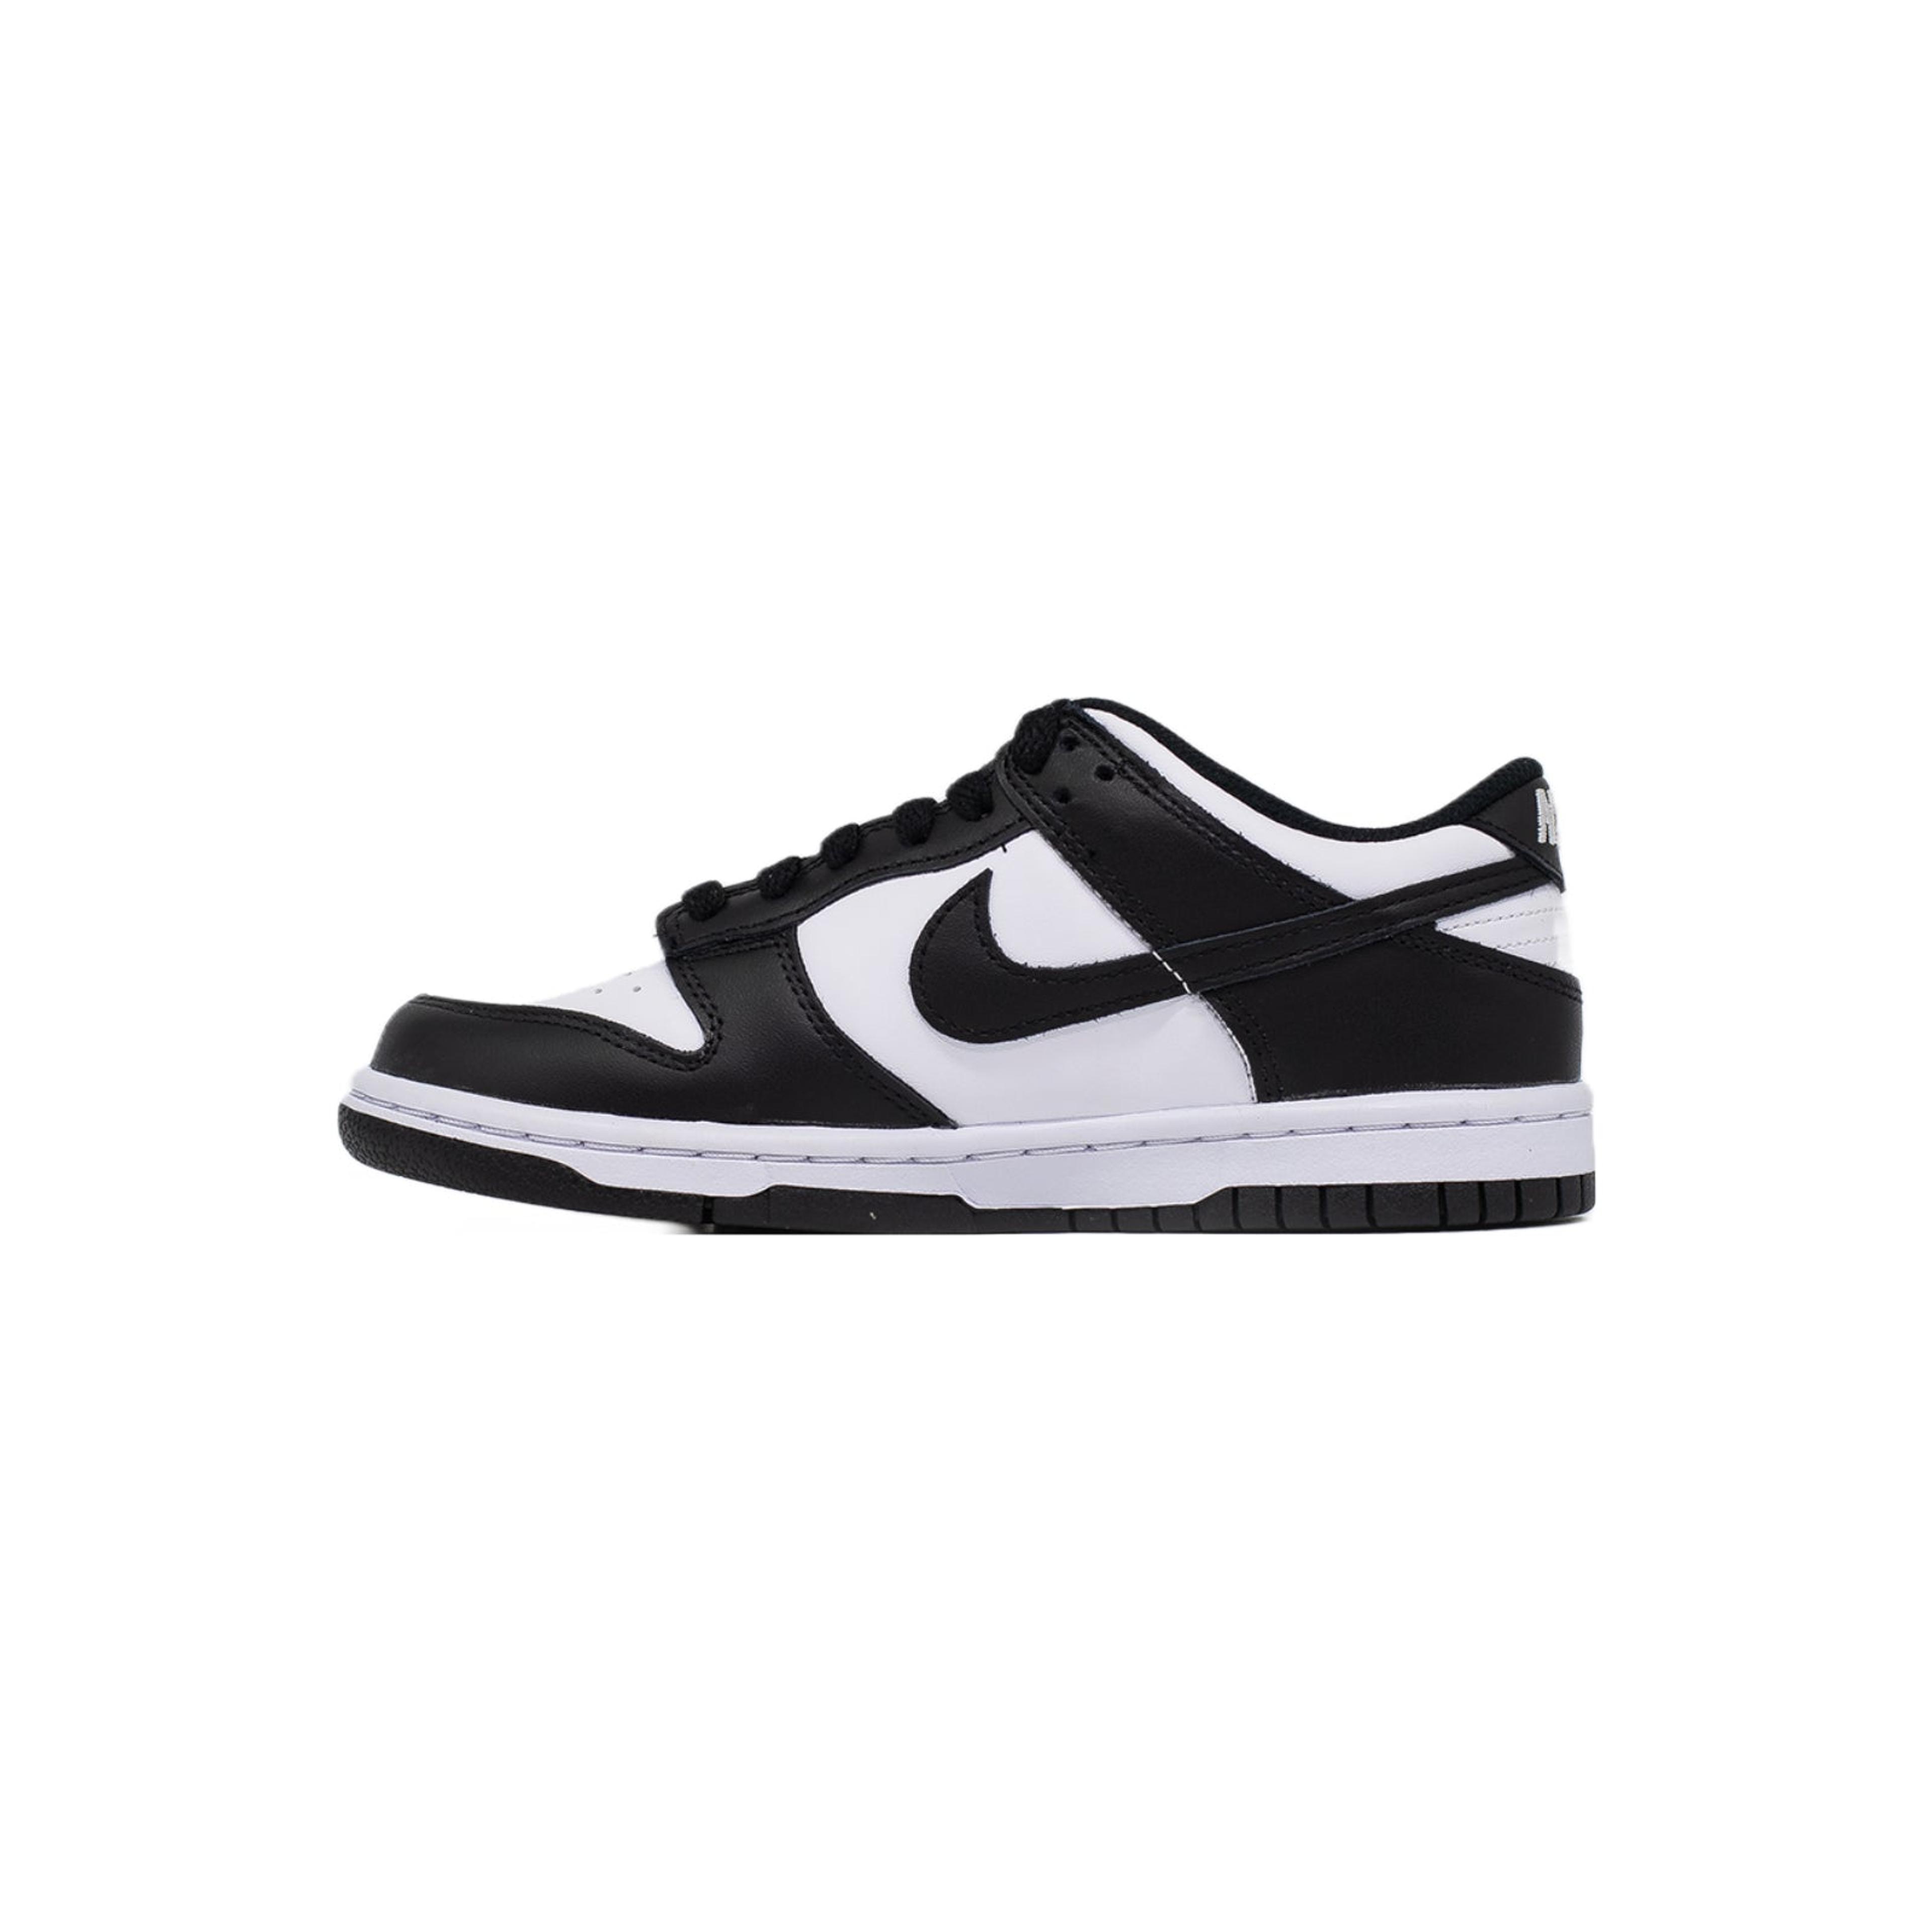 Alternate View 1 of Nike Dunk Low (PS), Black White